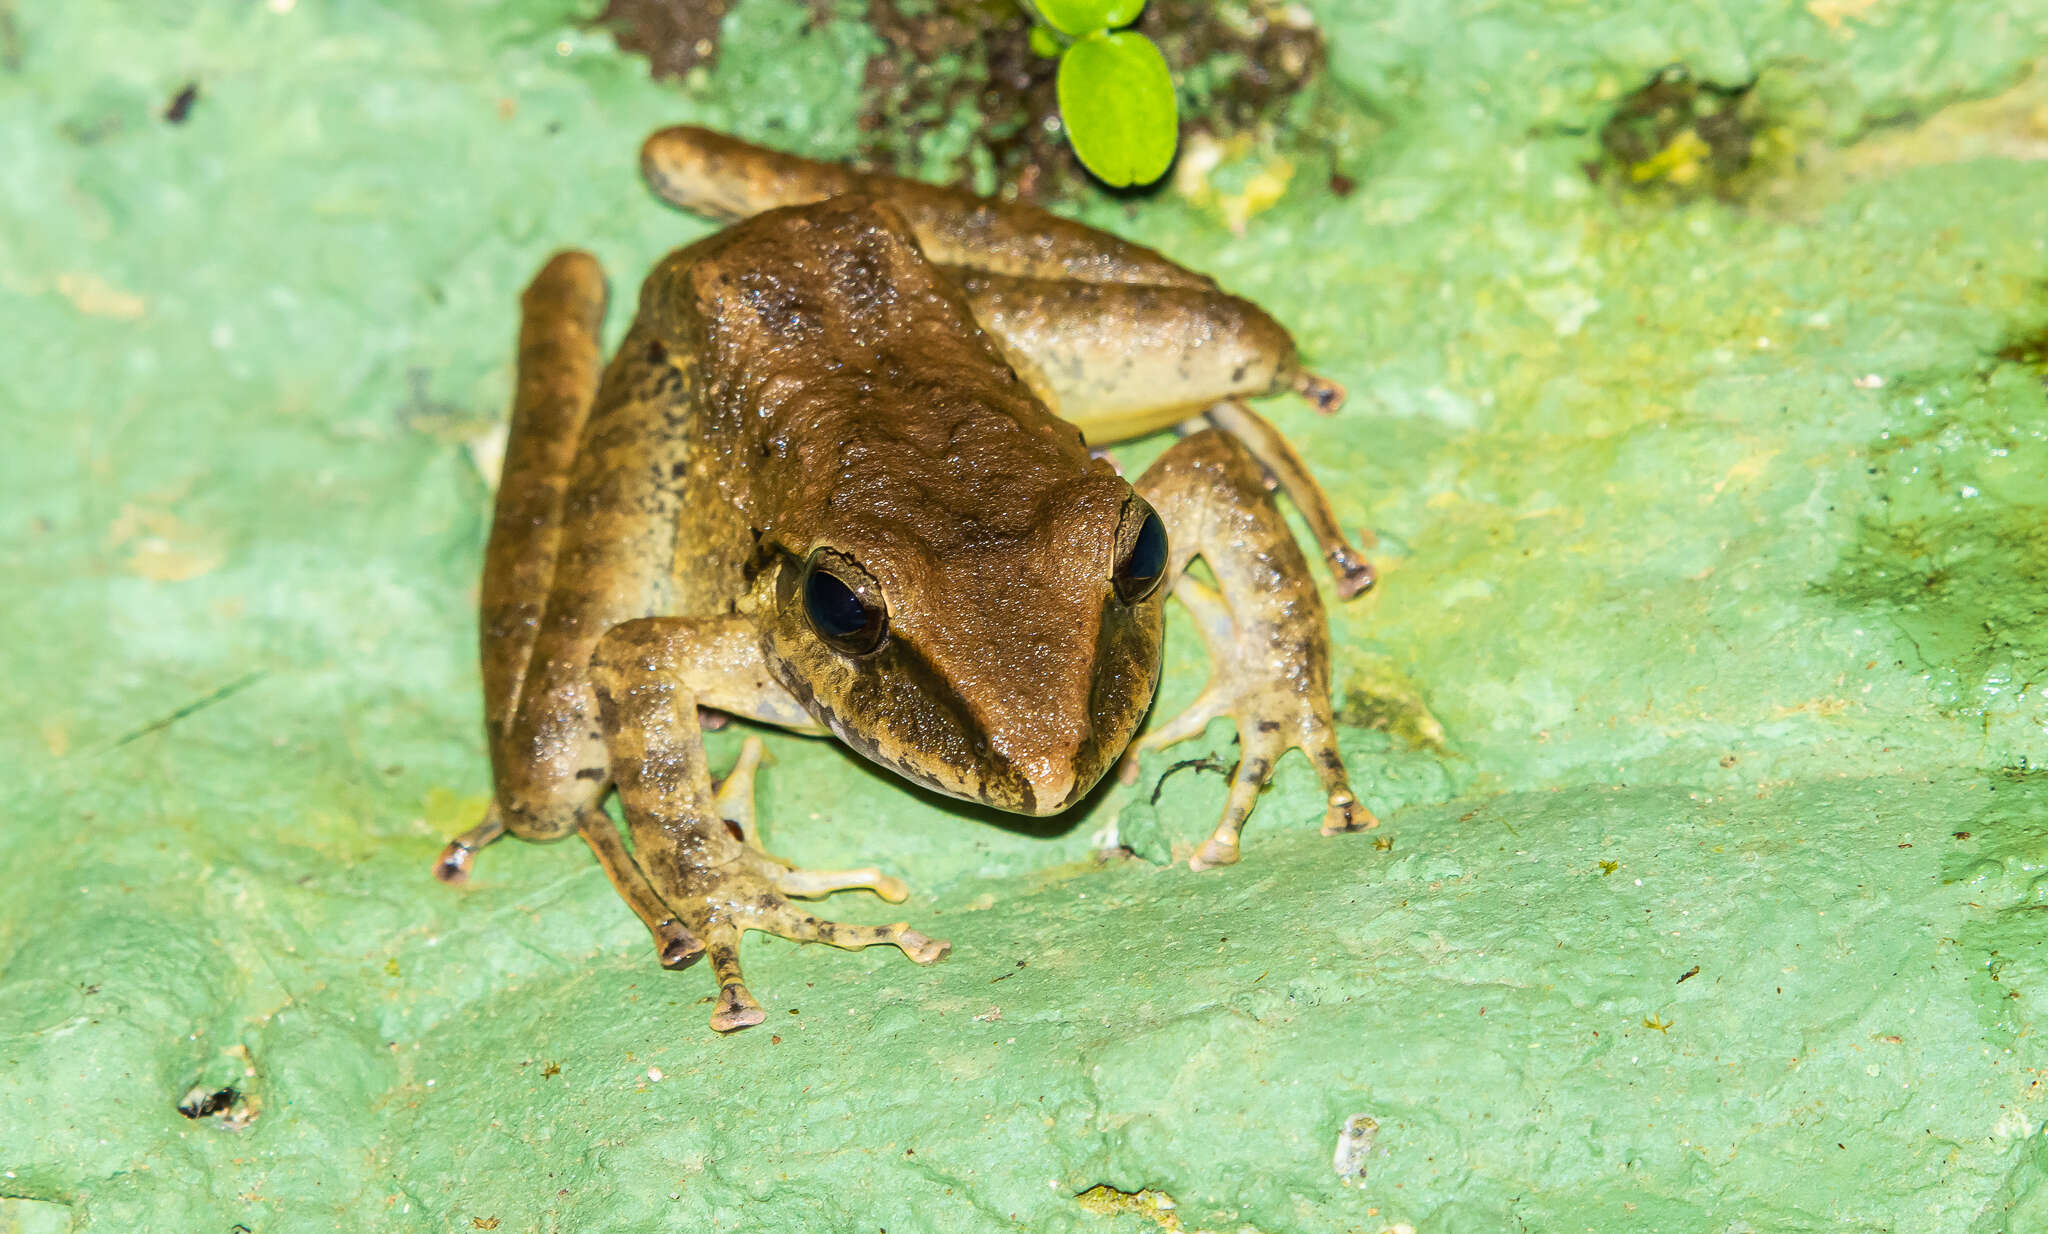 Image of Robber Frog